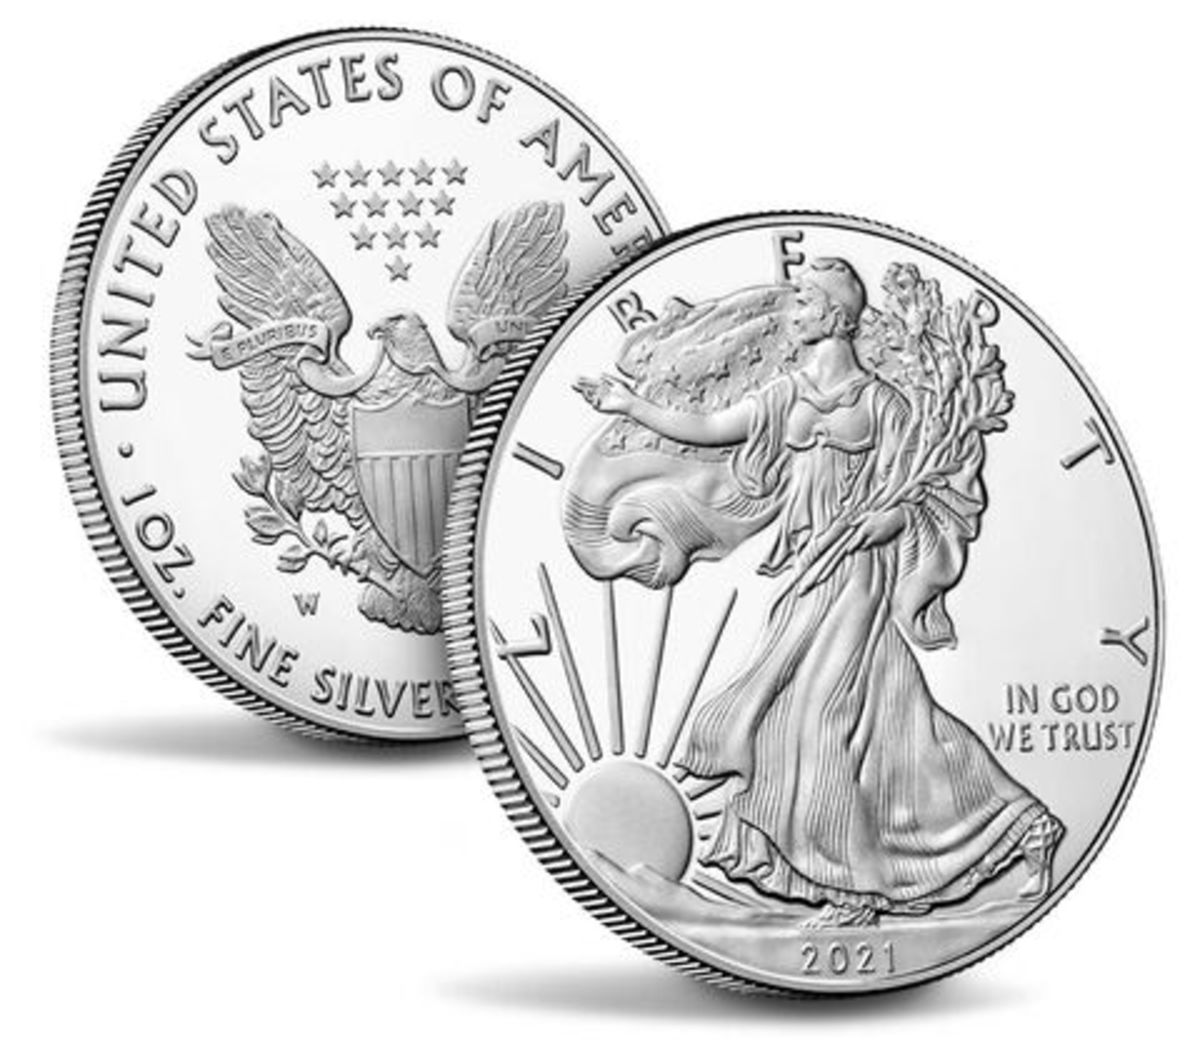 The 2021 silver proof American Eagle proof will be released Jan. 7. (Images courtesy U.S. Mint.)